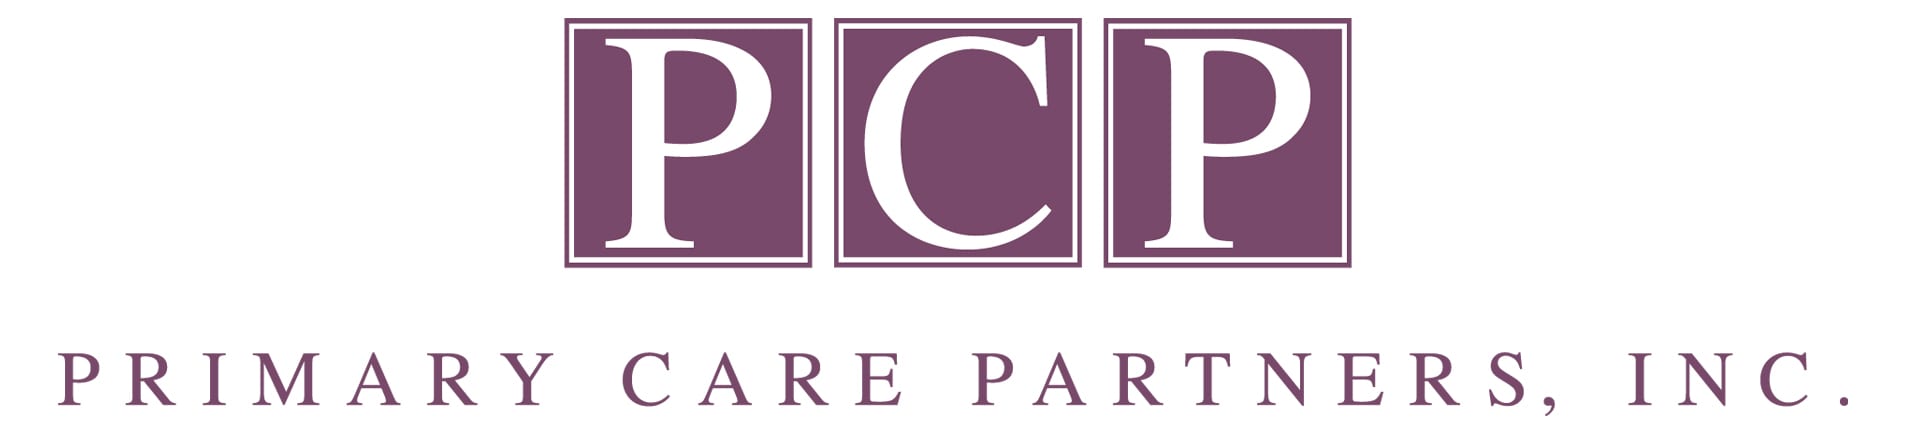 Primary Care Partners logo